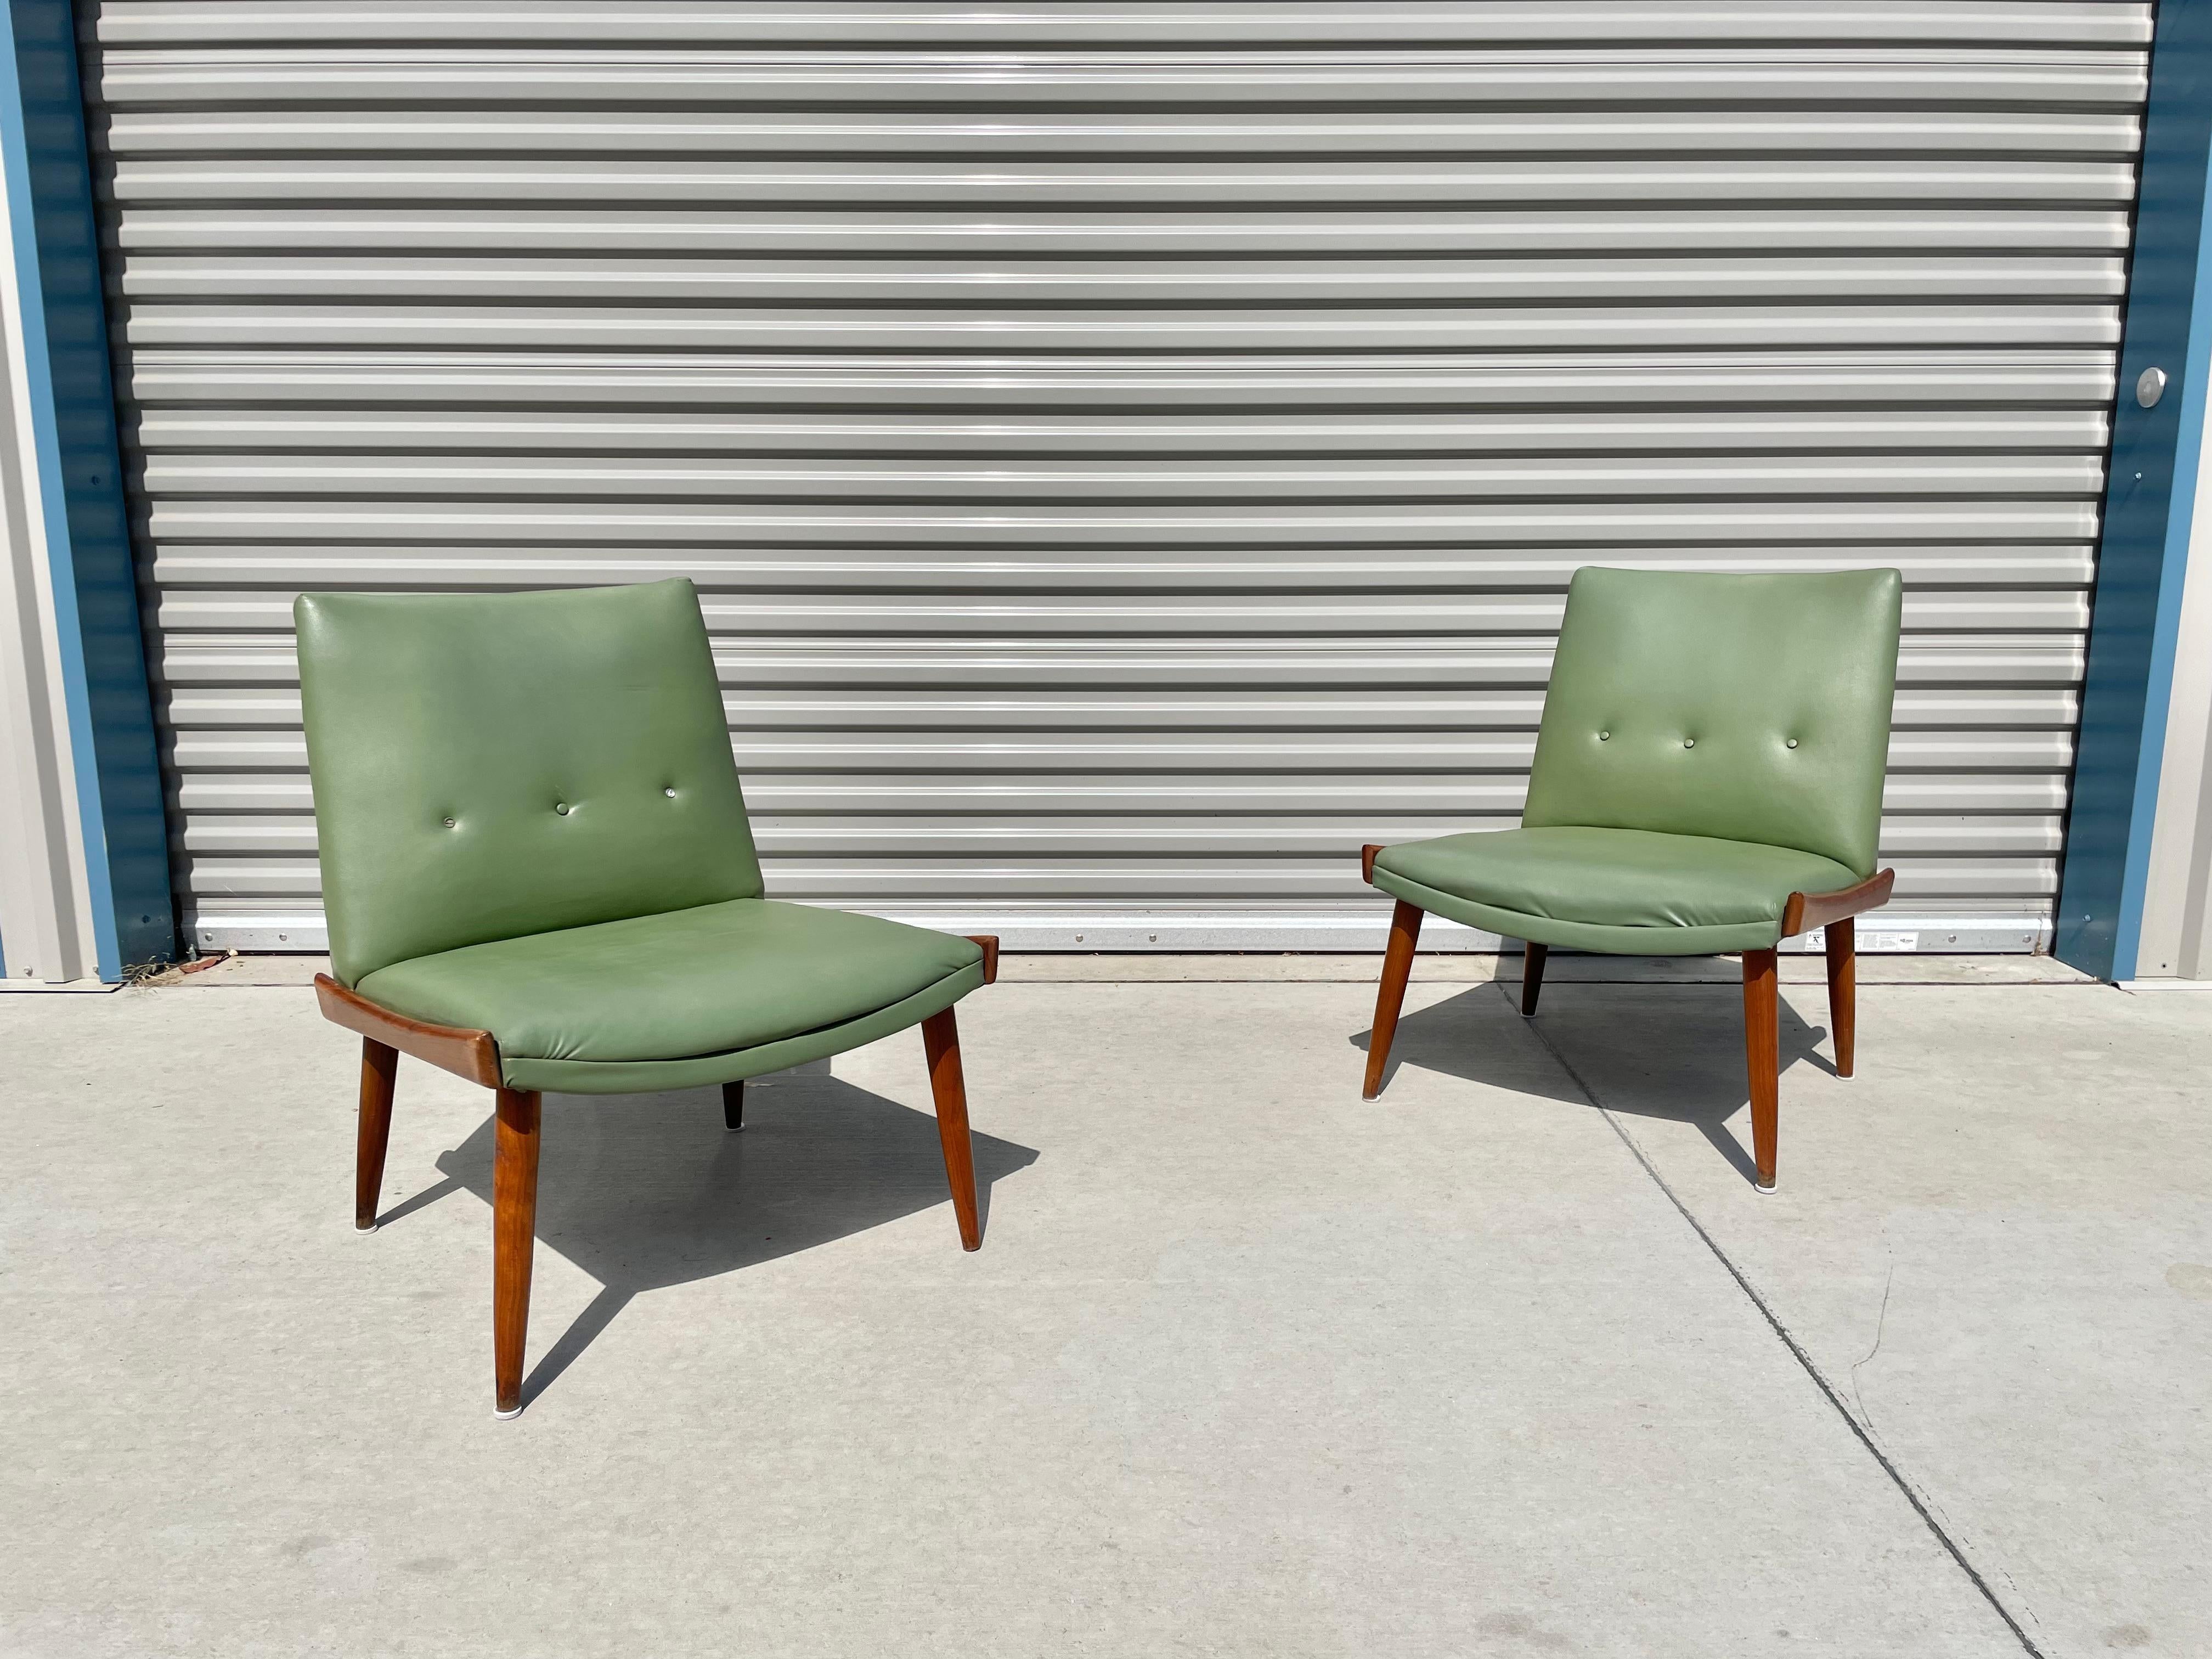 Stunning midcentury slipper chairs designed and manufactured by Kroehler Mfg Co. in the United States, circa 1960s. These chairs feature a beautiful green vinyl upholstery. The chairs also have two walnut slates on each side, giving them an